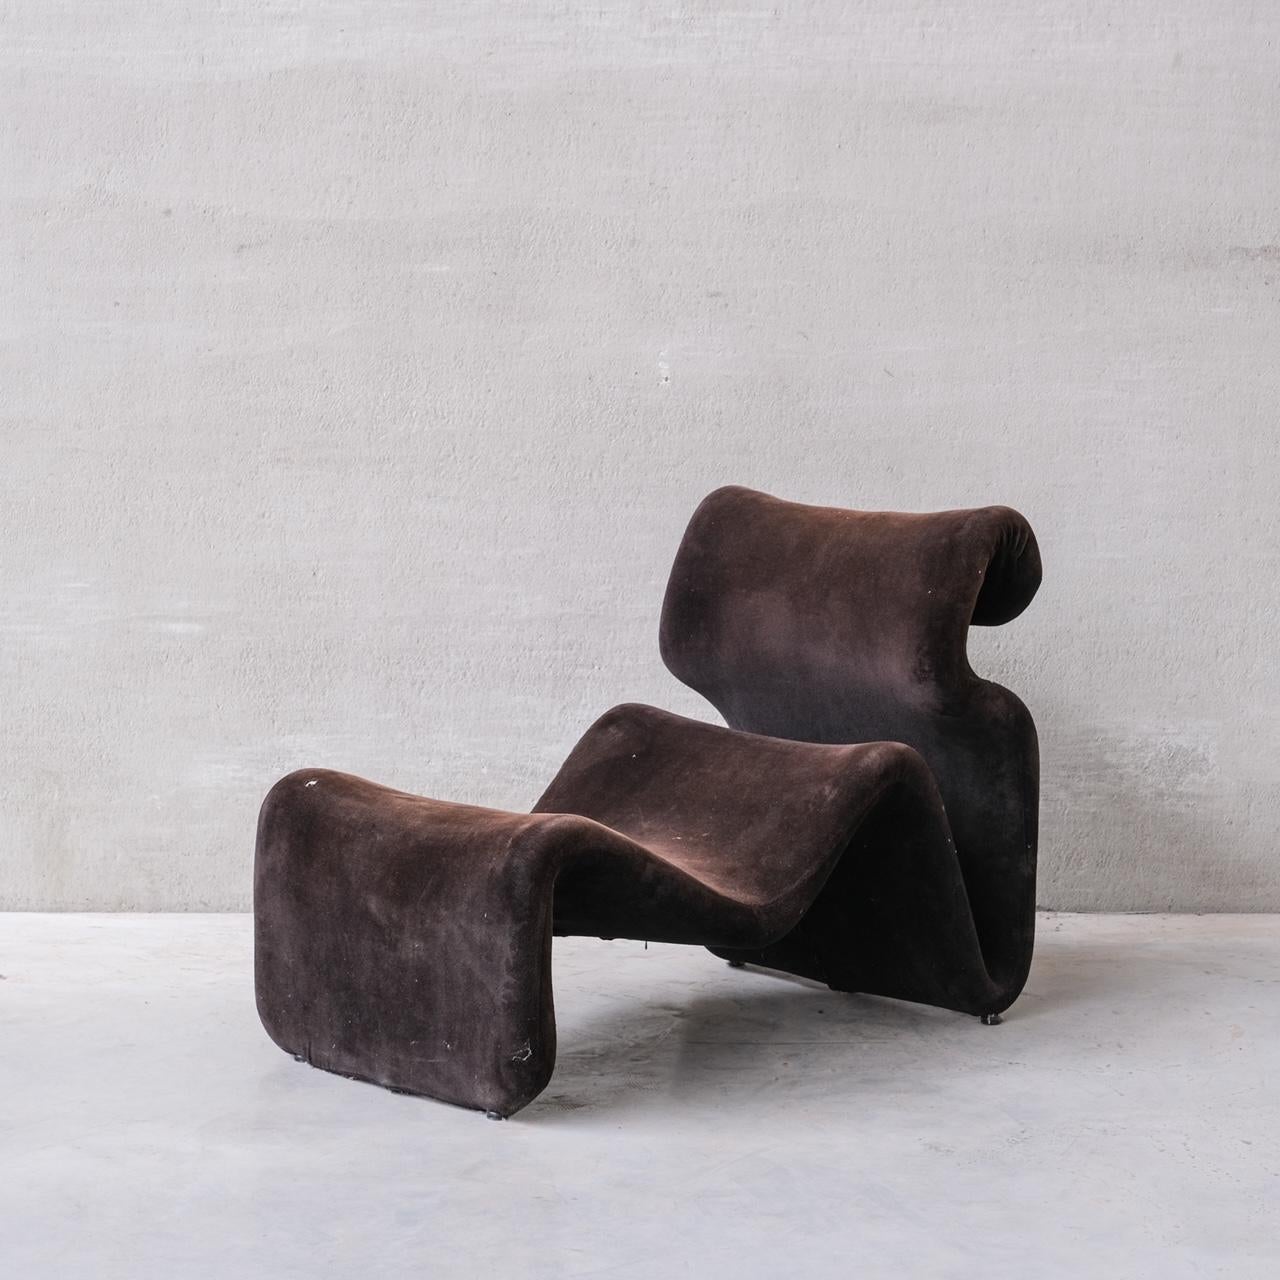 An increasingly rare longer model Etcetera lounge chair and footrest/ottoman.

Sweden, c1970s.

Designed by Jan Ekselius for JOC Sweden.

Original upholstery is very worn, so this is sold for upholstery. We can recommend upholsterer's.

Beware of